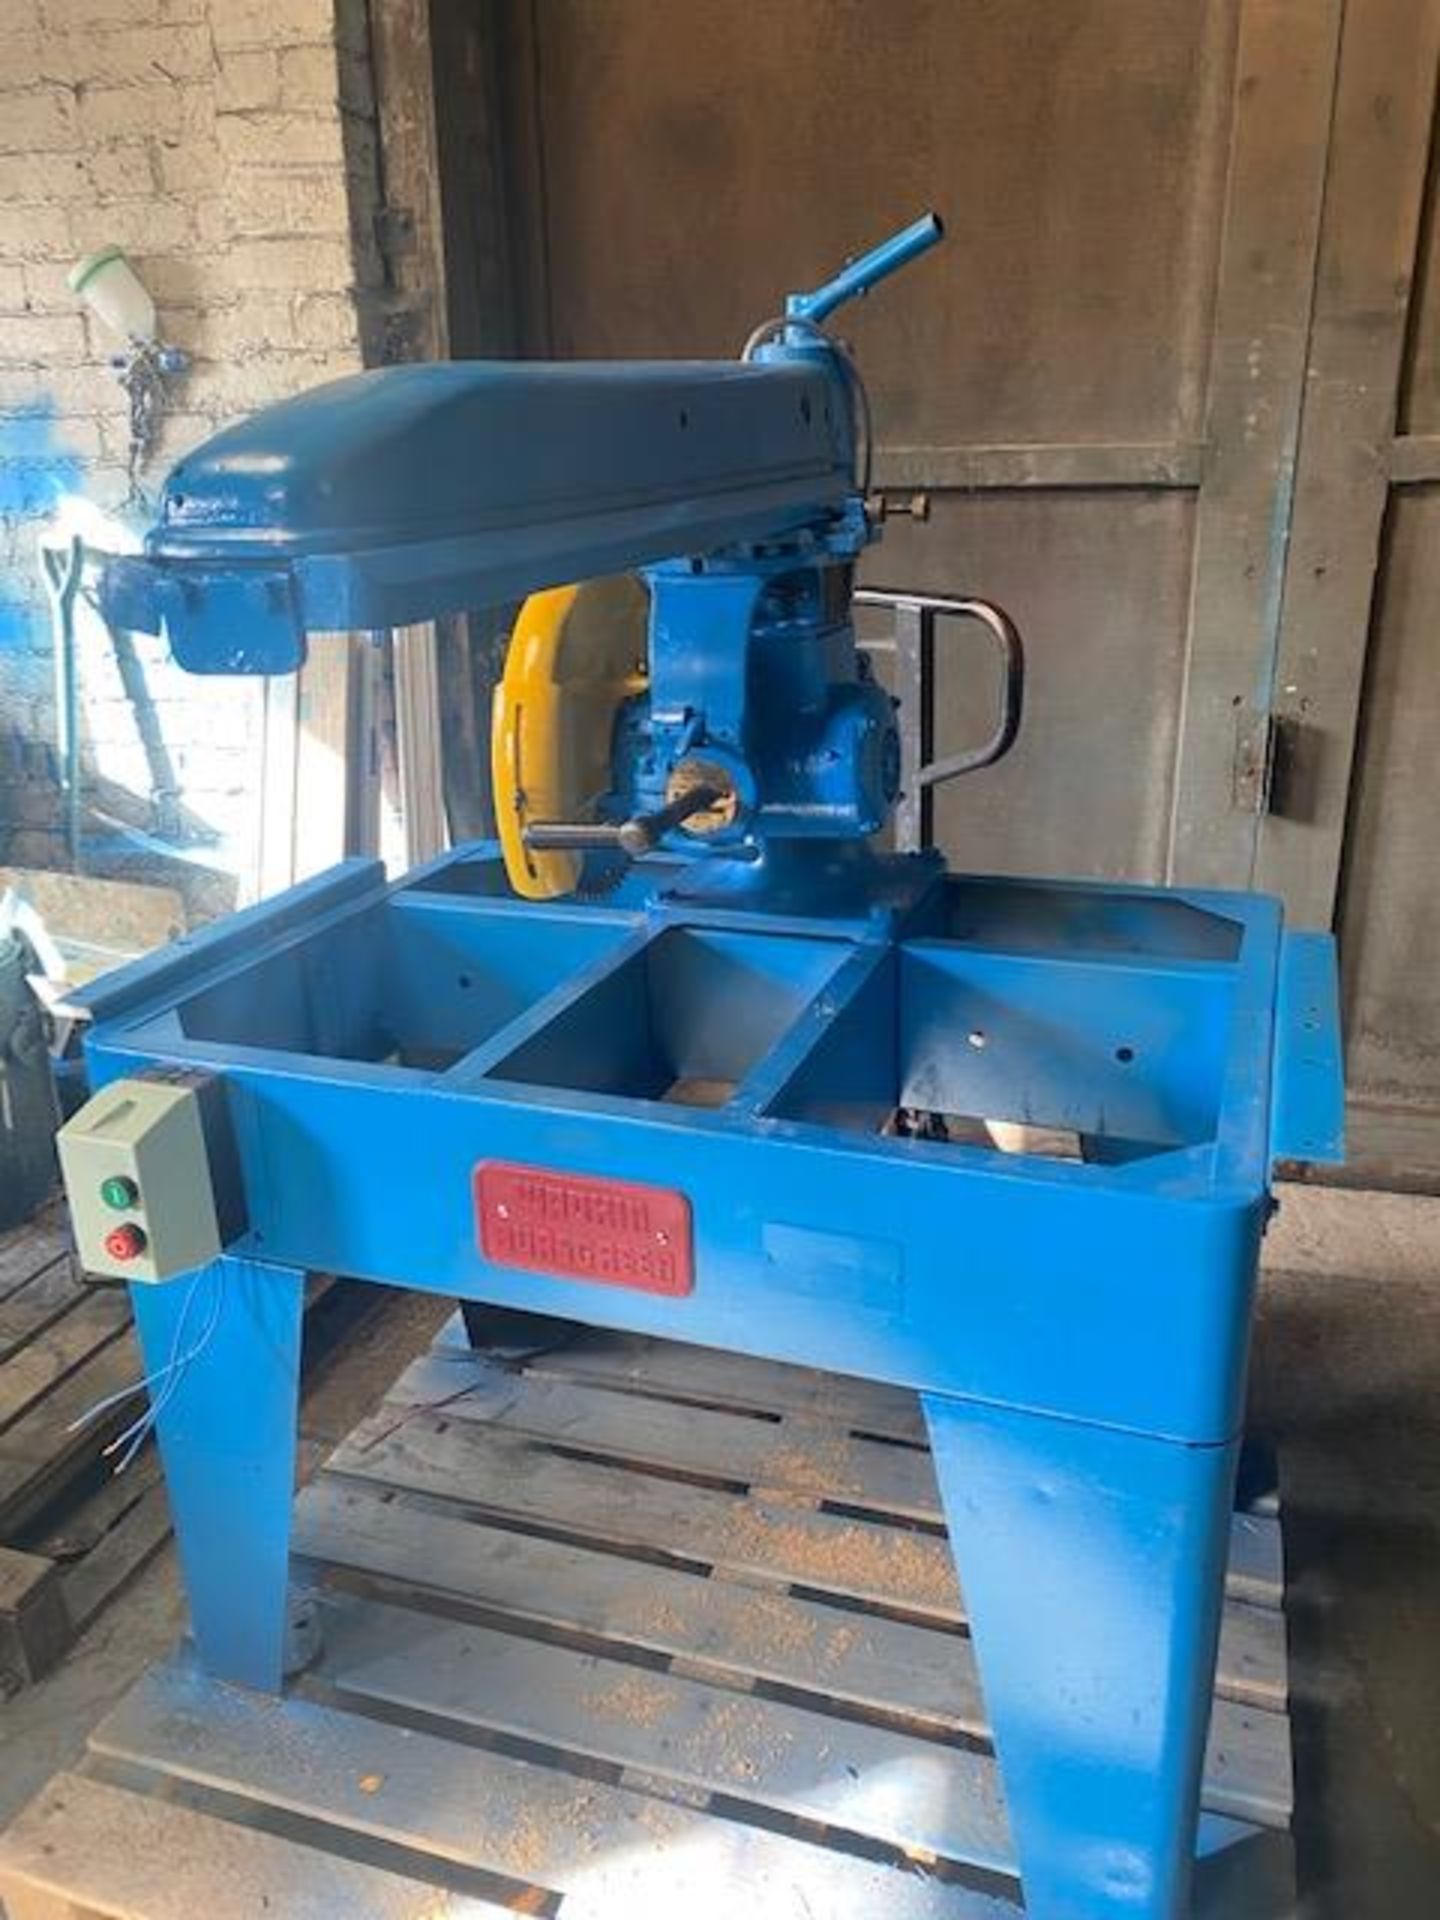 Wadkin BRA 16in. Radial Arm Saw (vendors comments - good condition), lot location - Backridge - Image 2 of 7